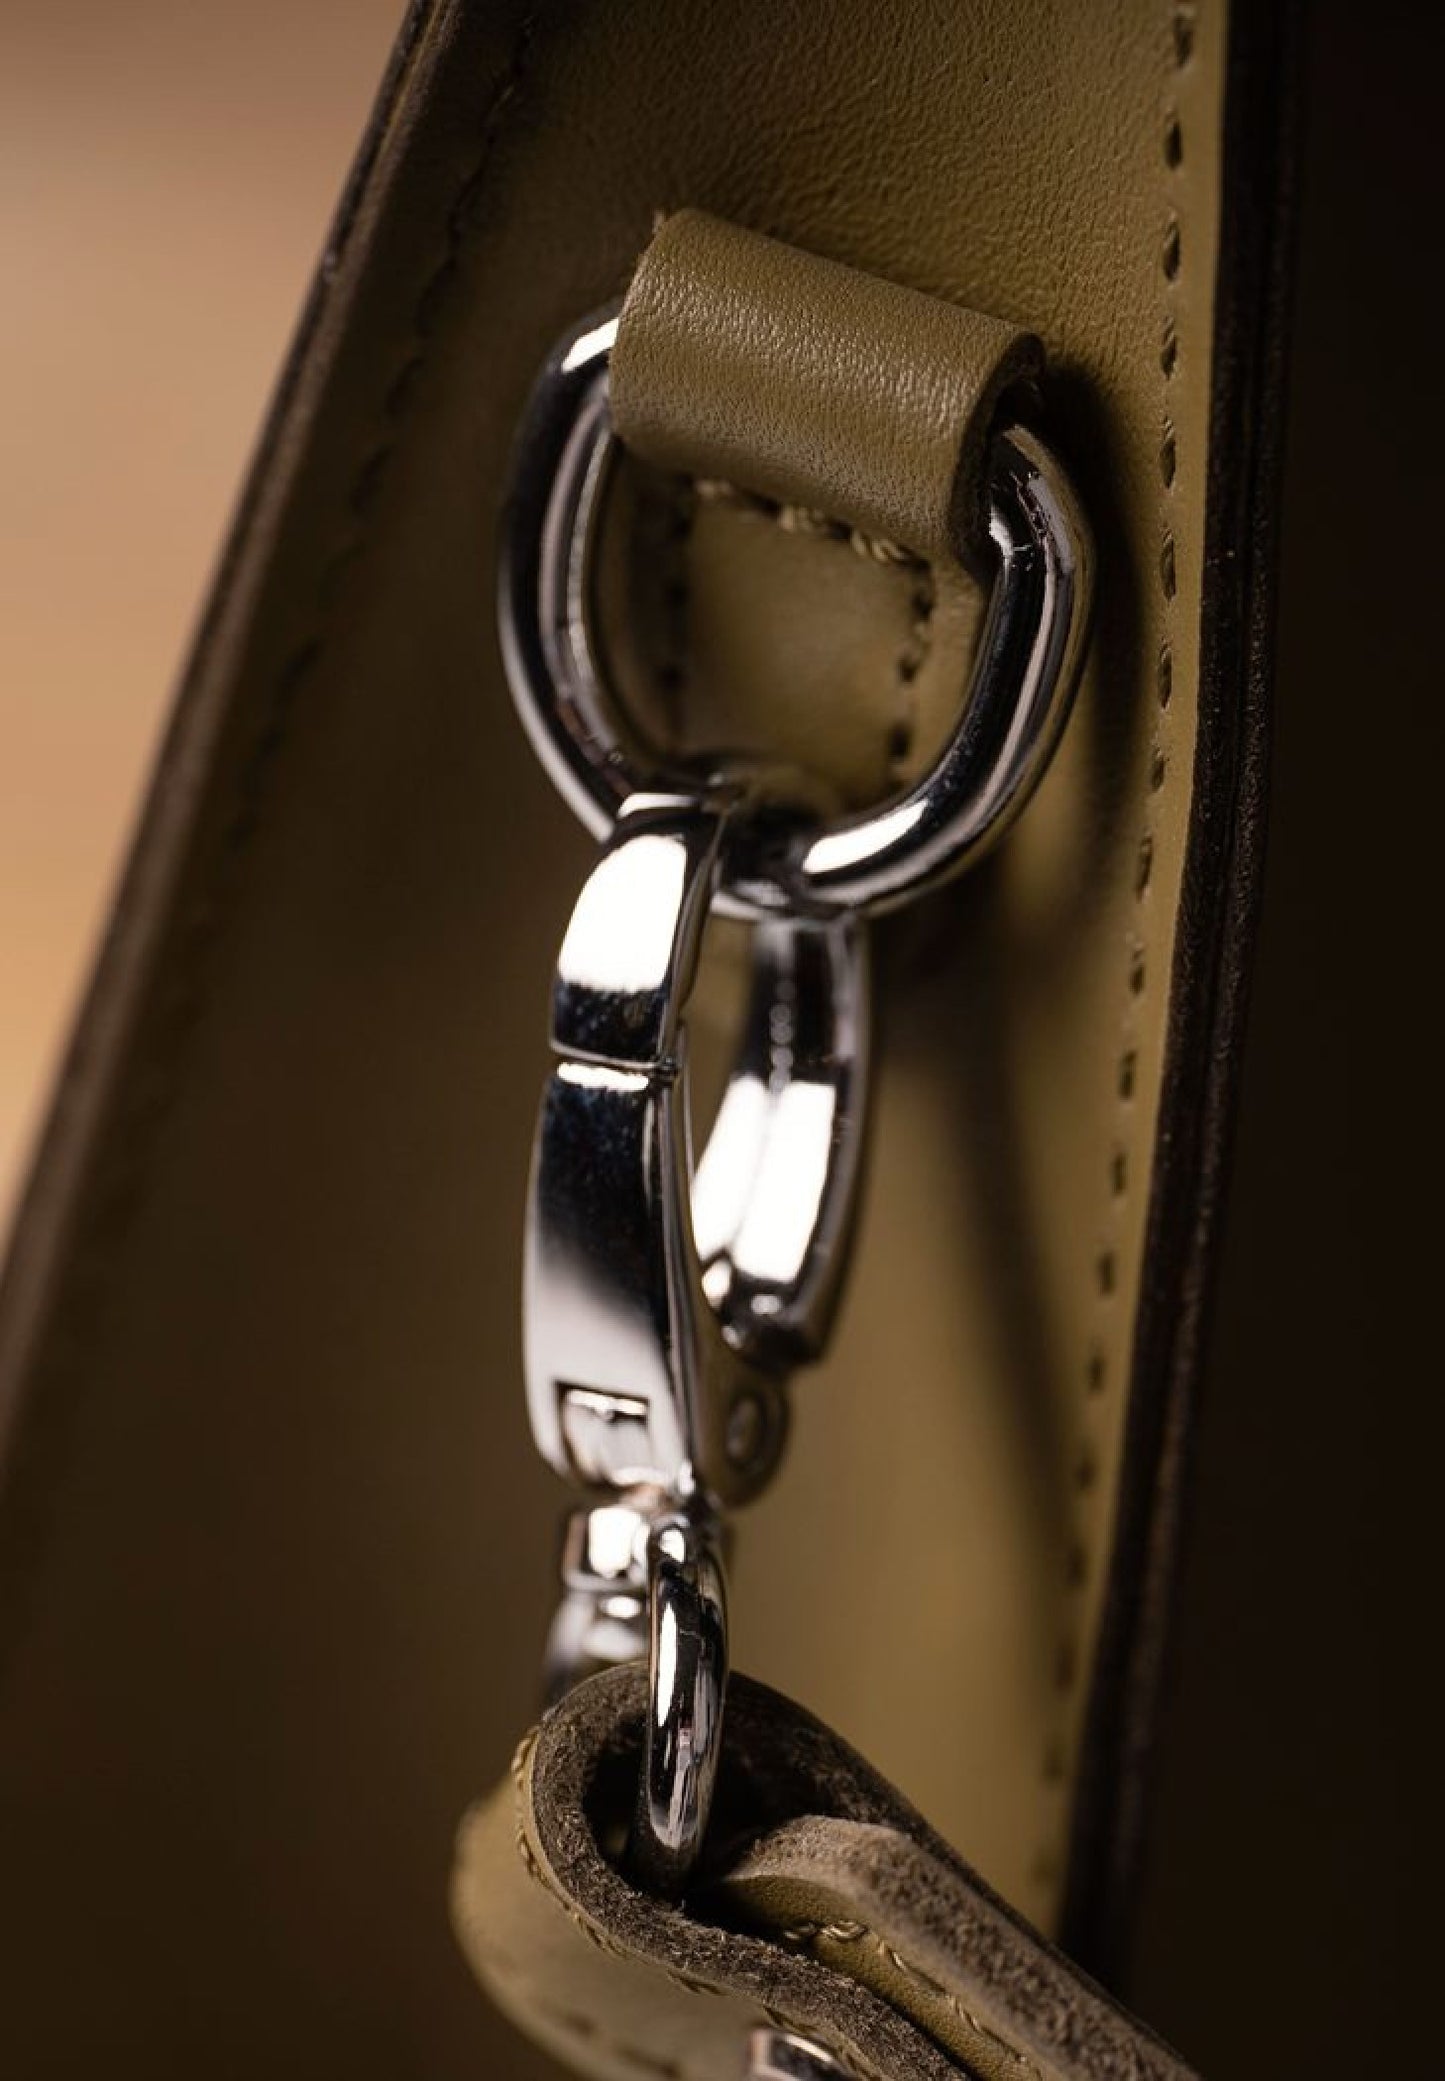 green olive leather bag with a silver detail